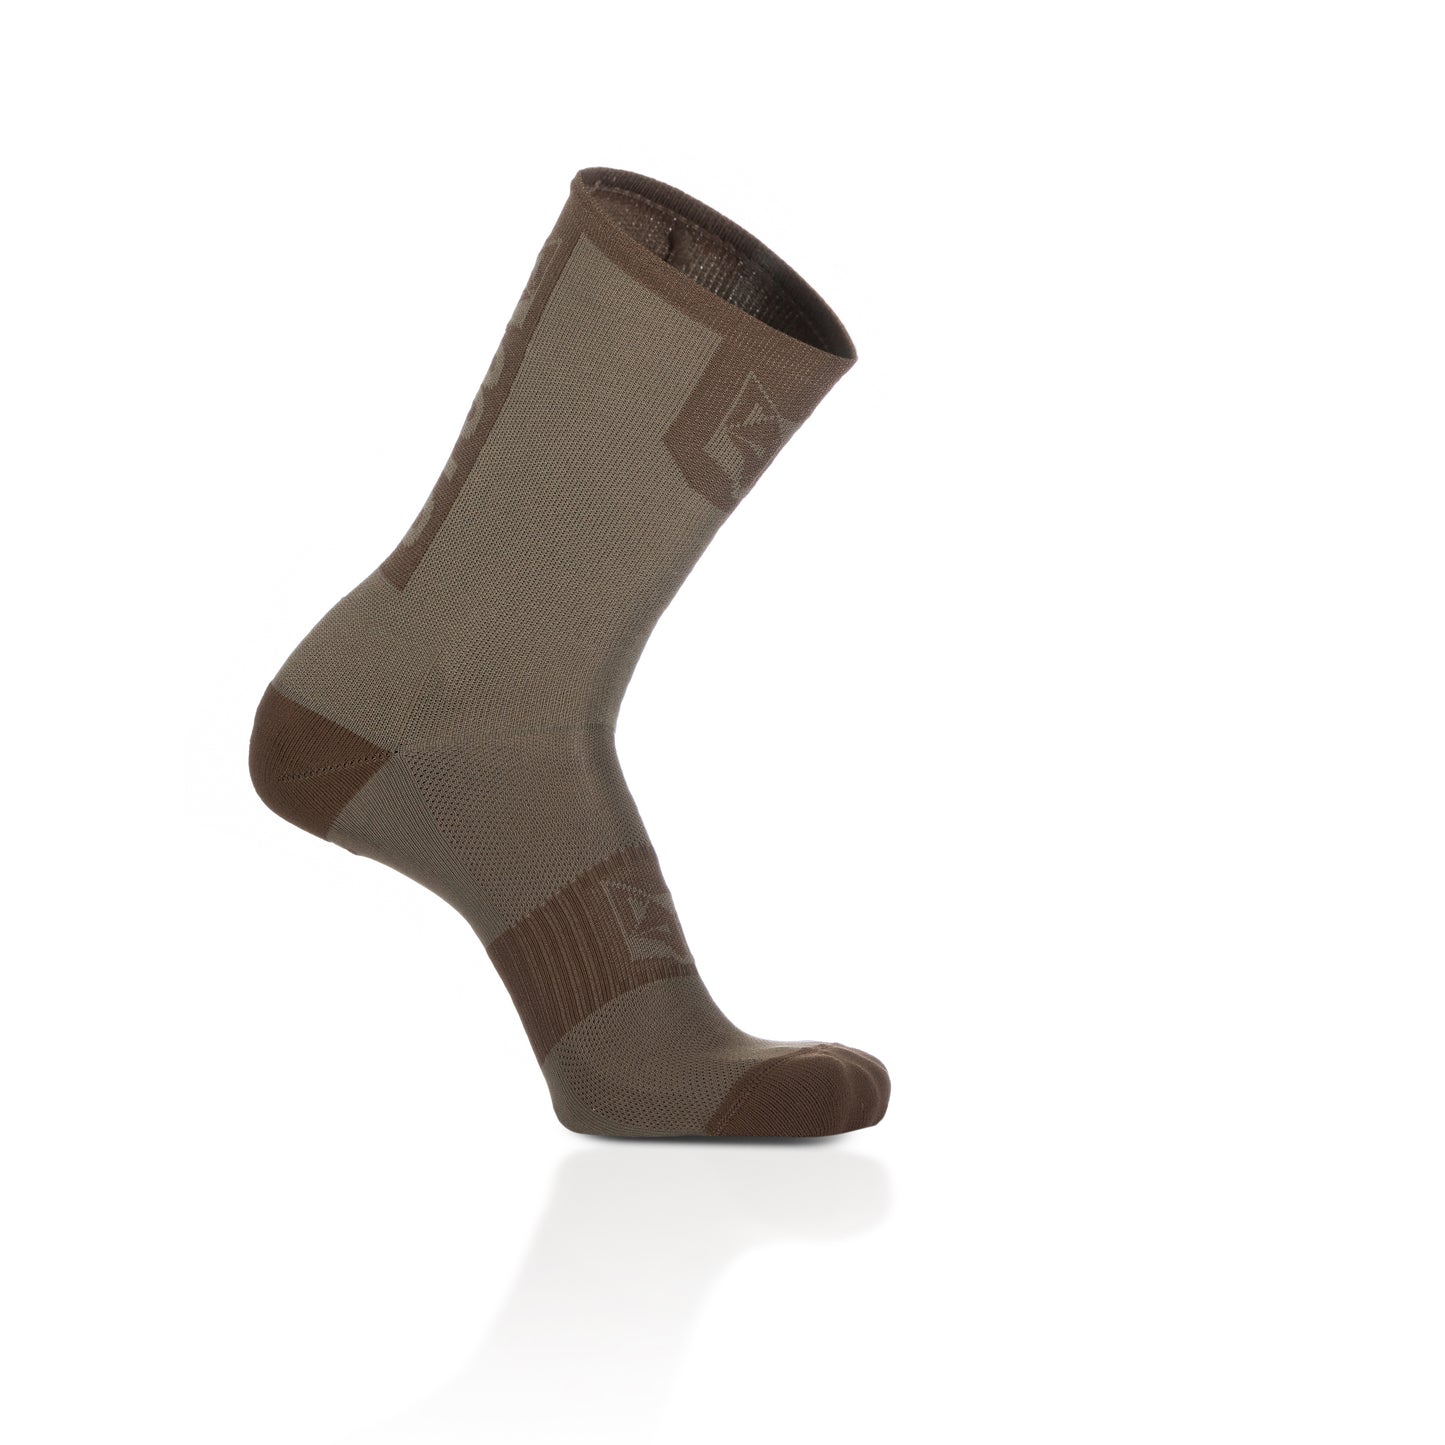 Calcetines de Ciclismo High Cut - Gold & Coffee (Outlet)